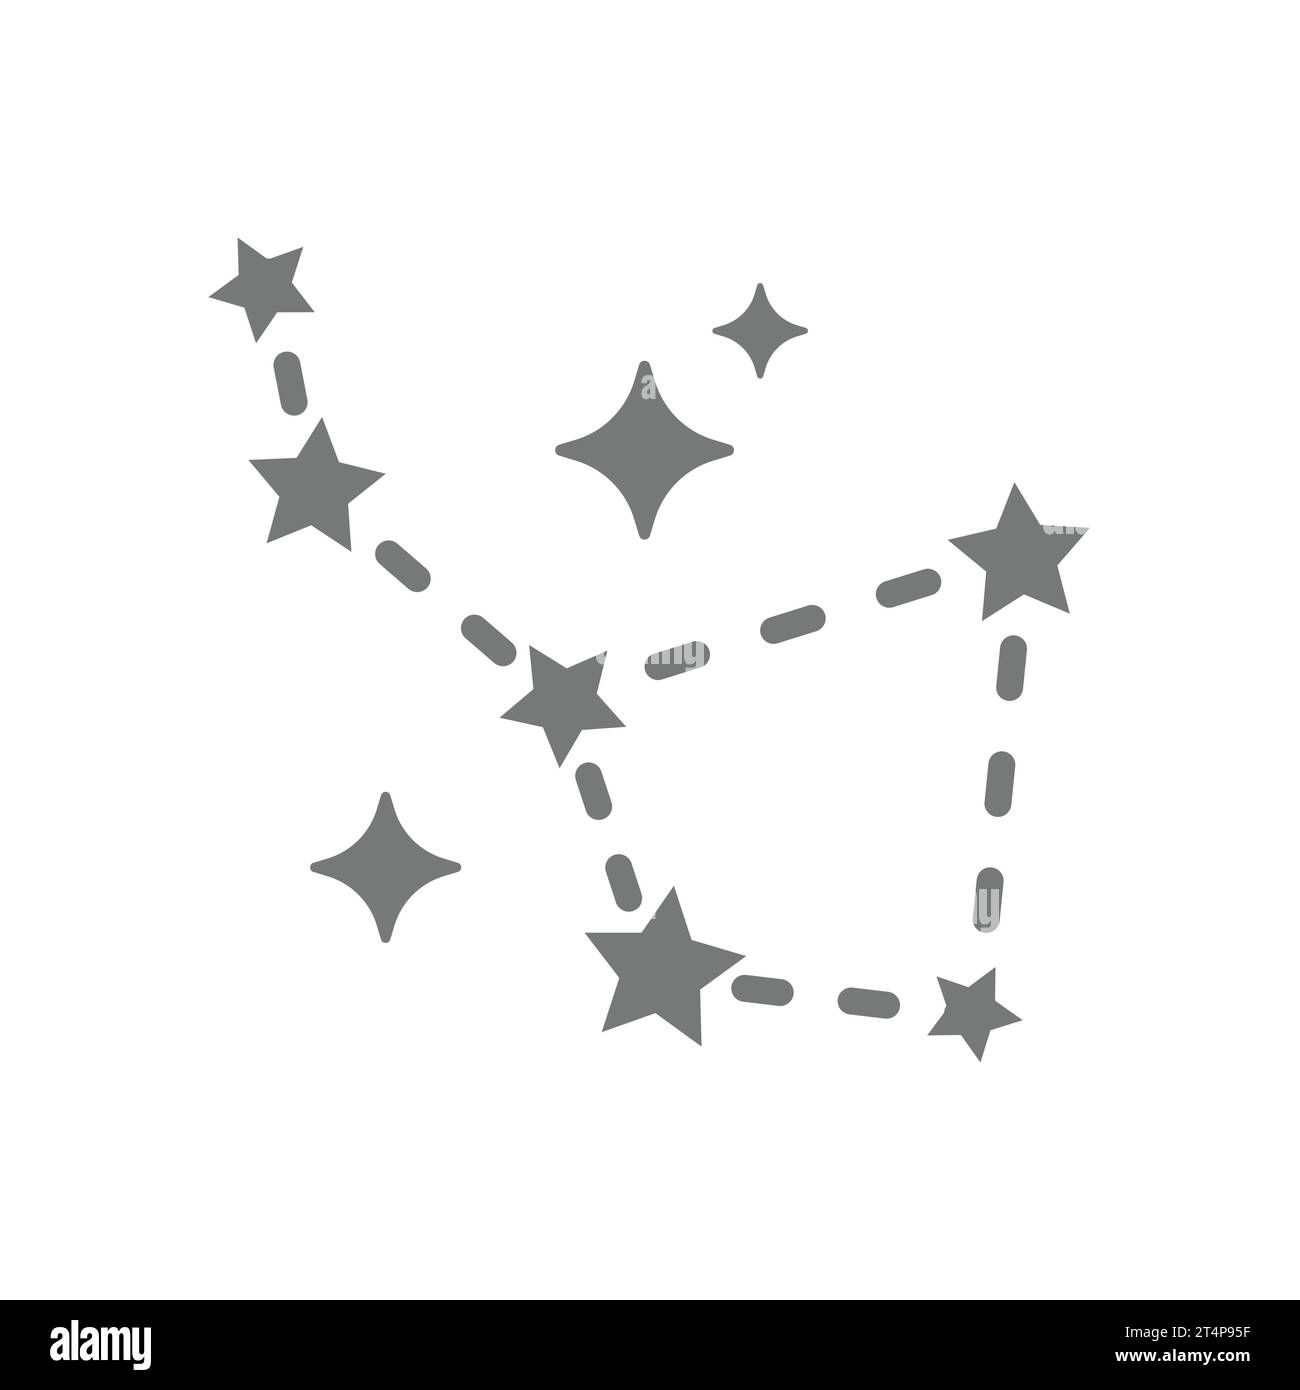 Constellation with stars vector icon. Astrology and space symbol. Stock Vector